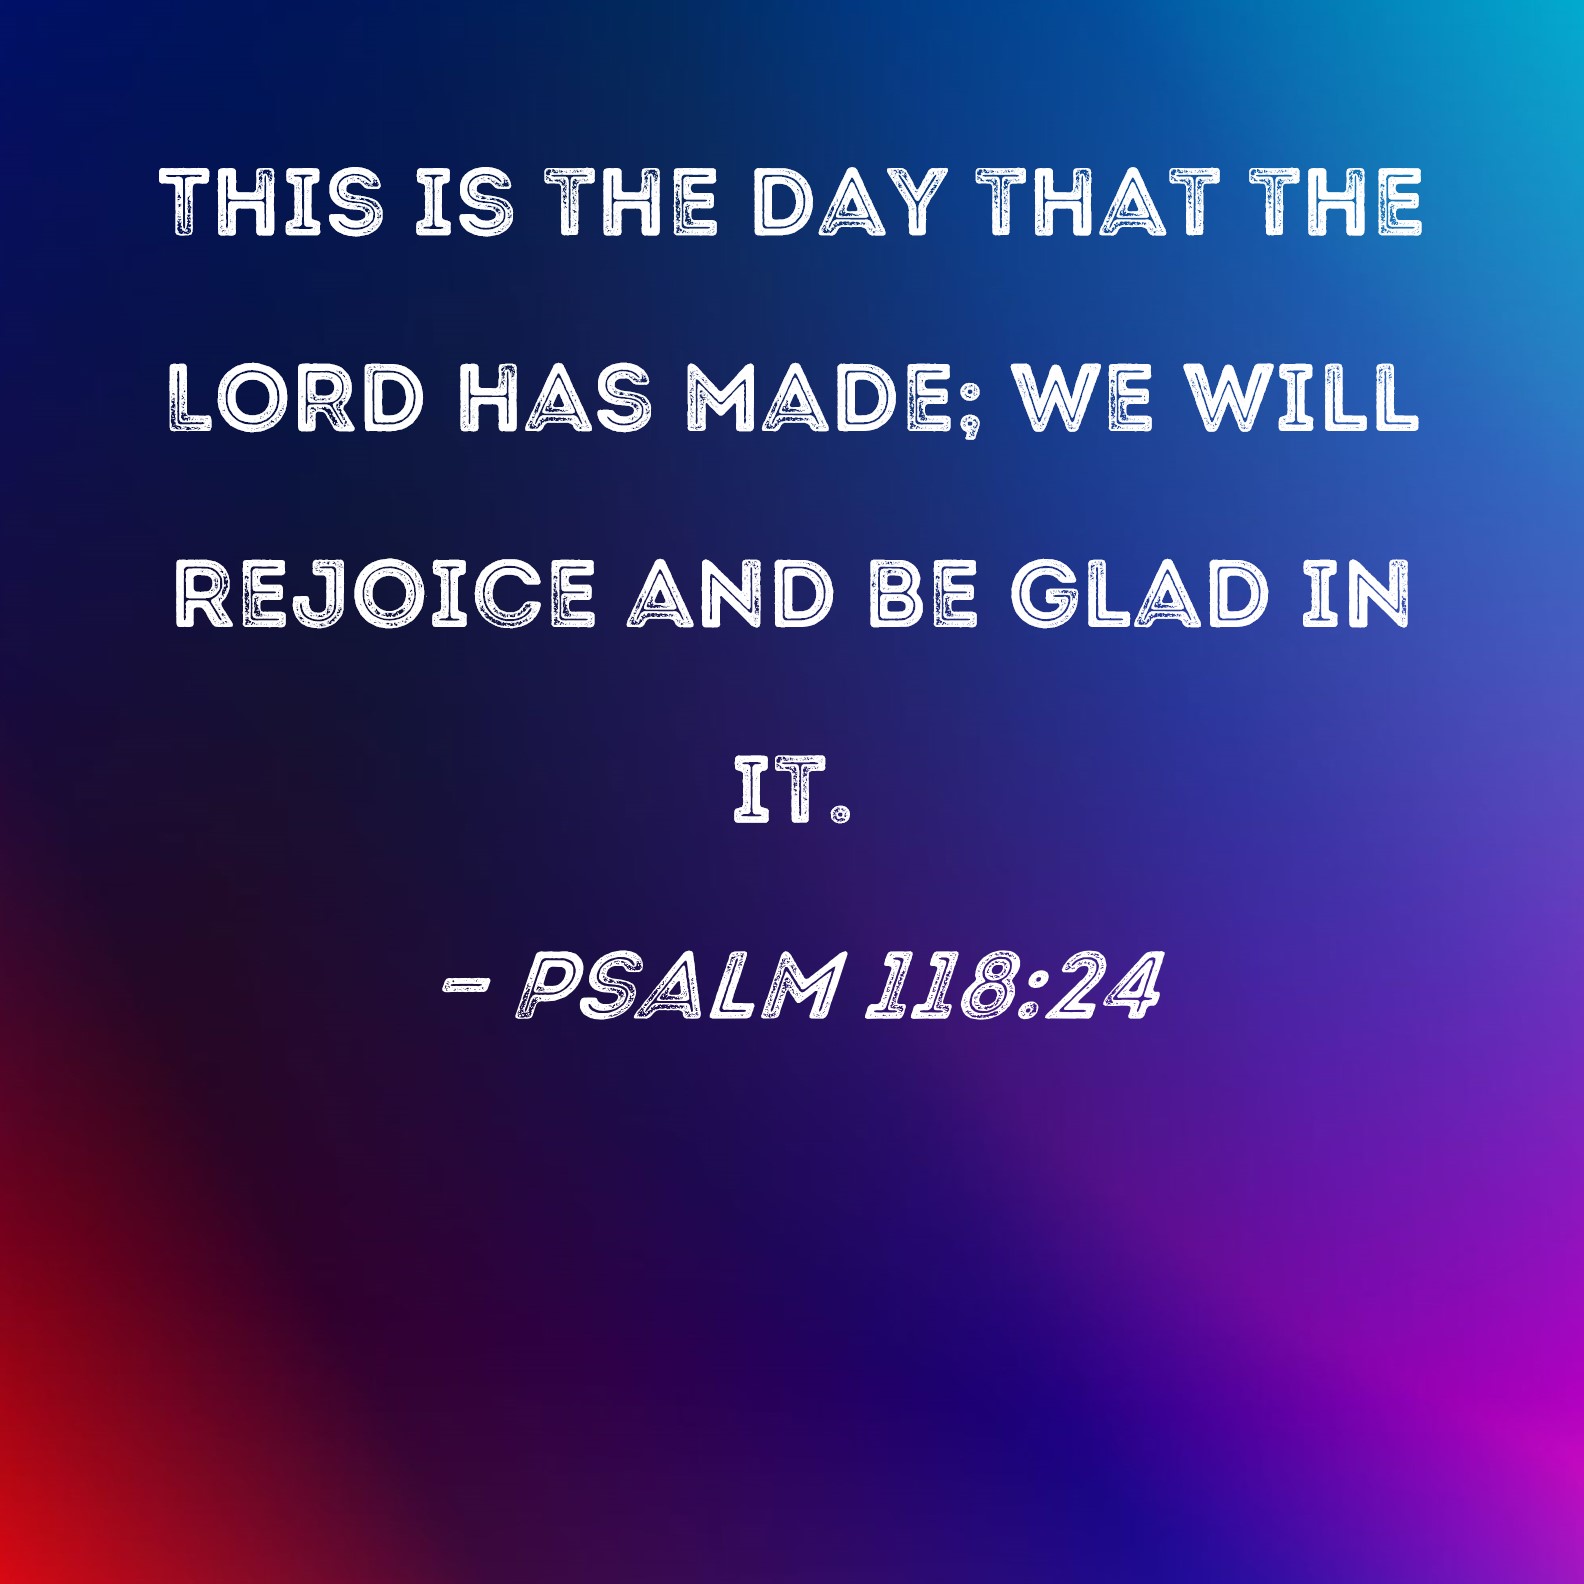 psalm-118-24-this-is-the-day-that-the-lord-has-made-we-will-rejoice